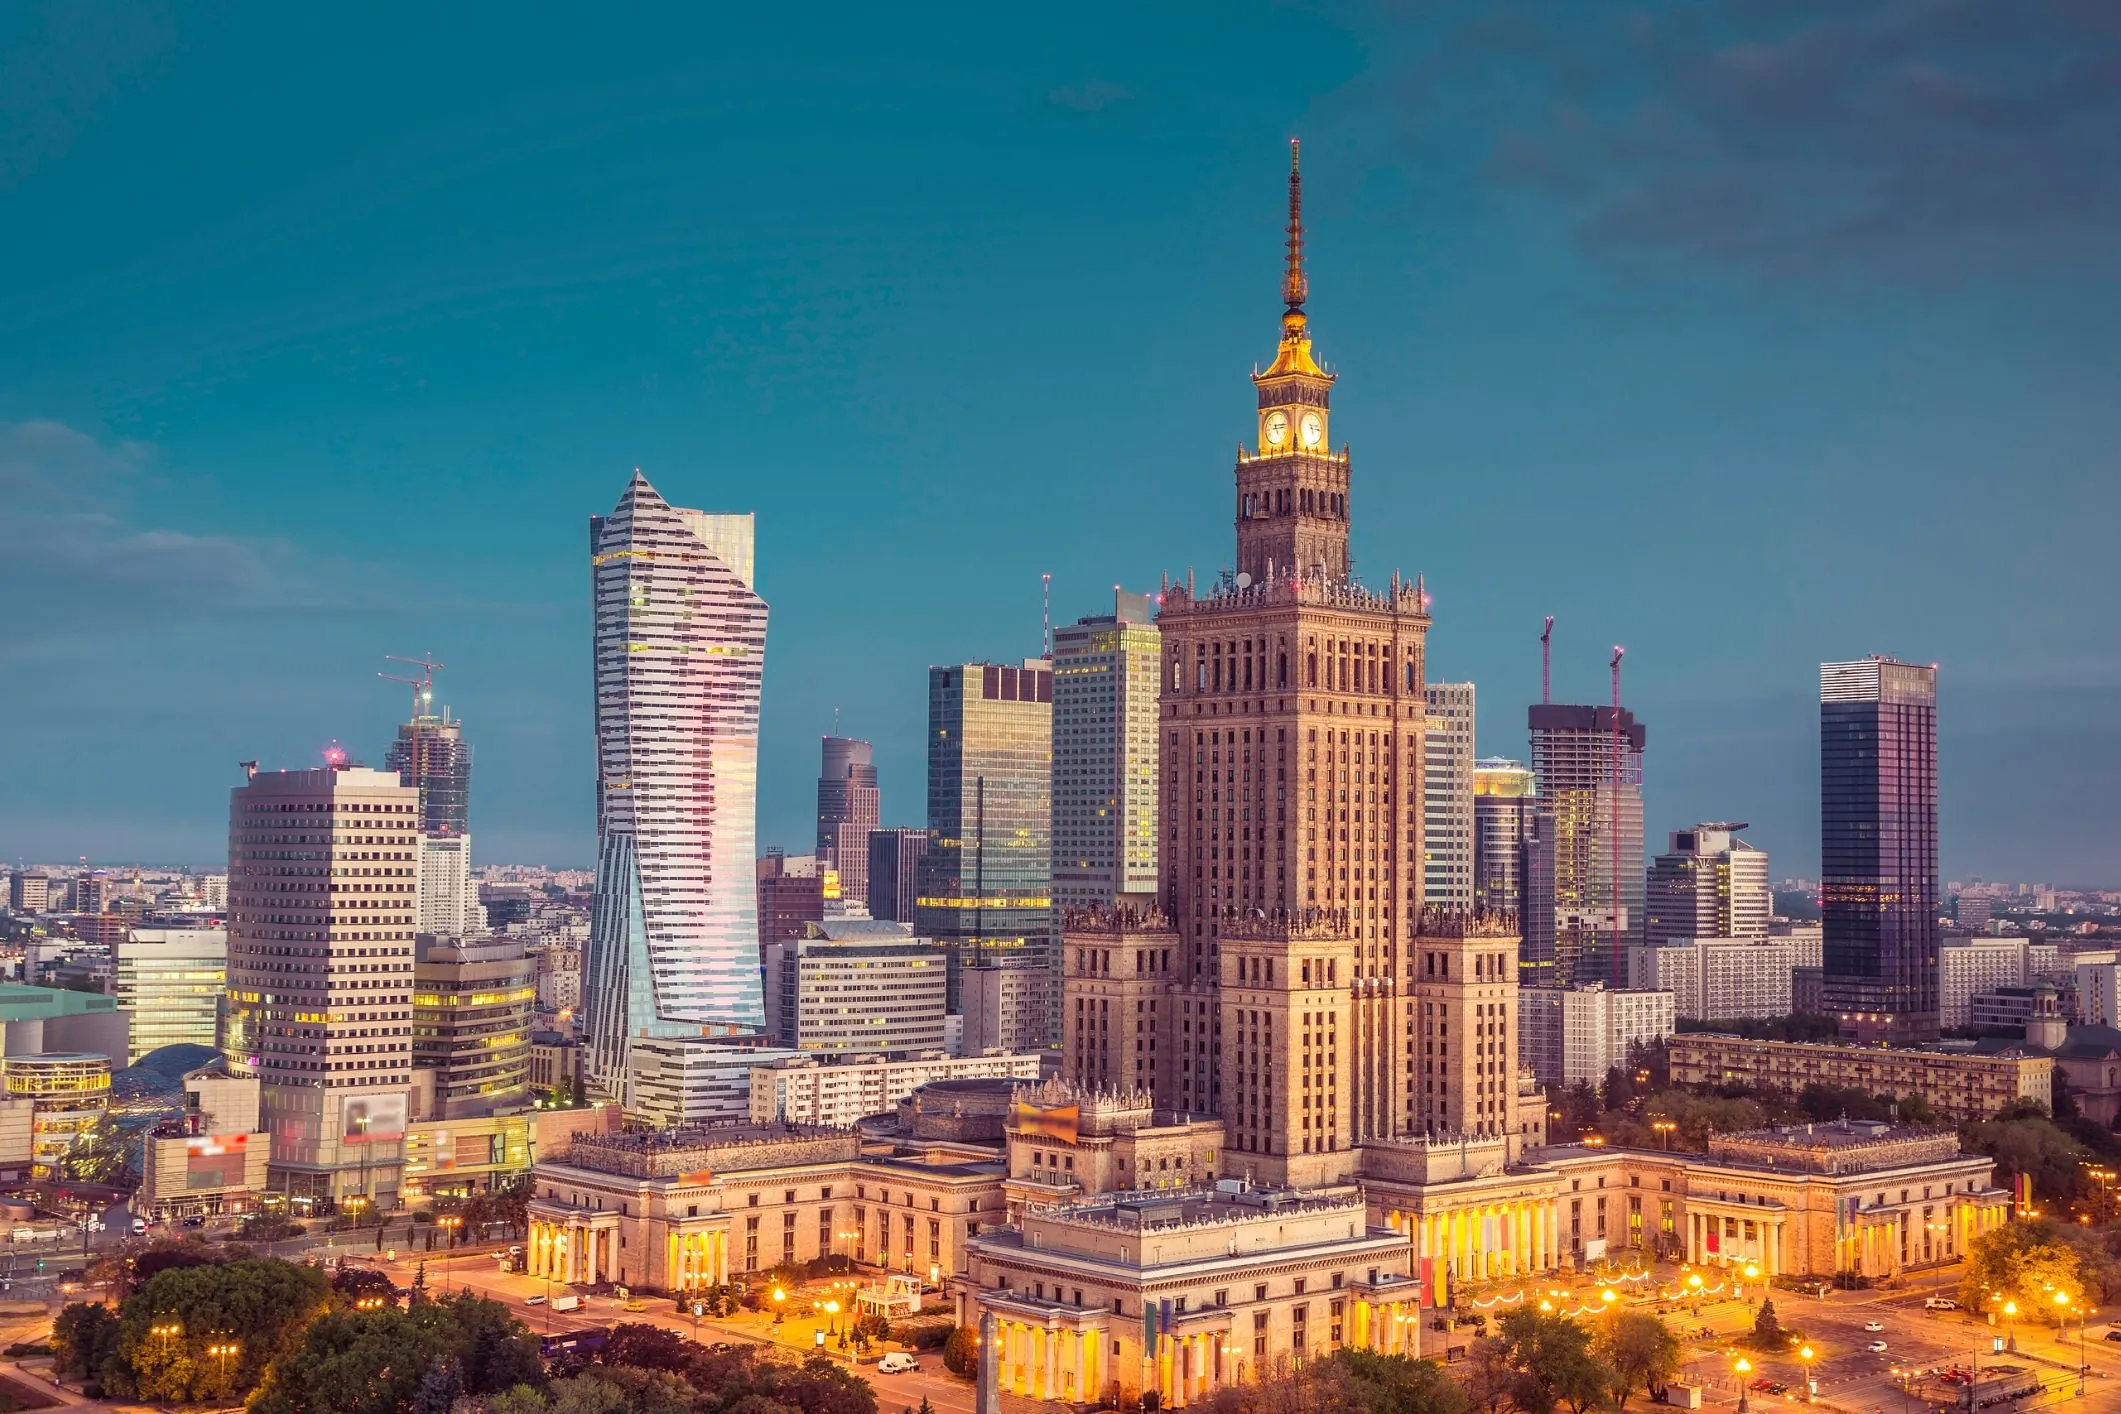 Palace of Culture and Science in Downtown Warsaw - EdgeConneX data centers